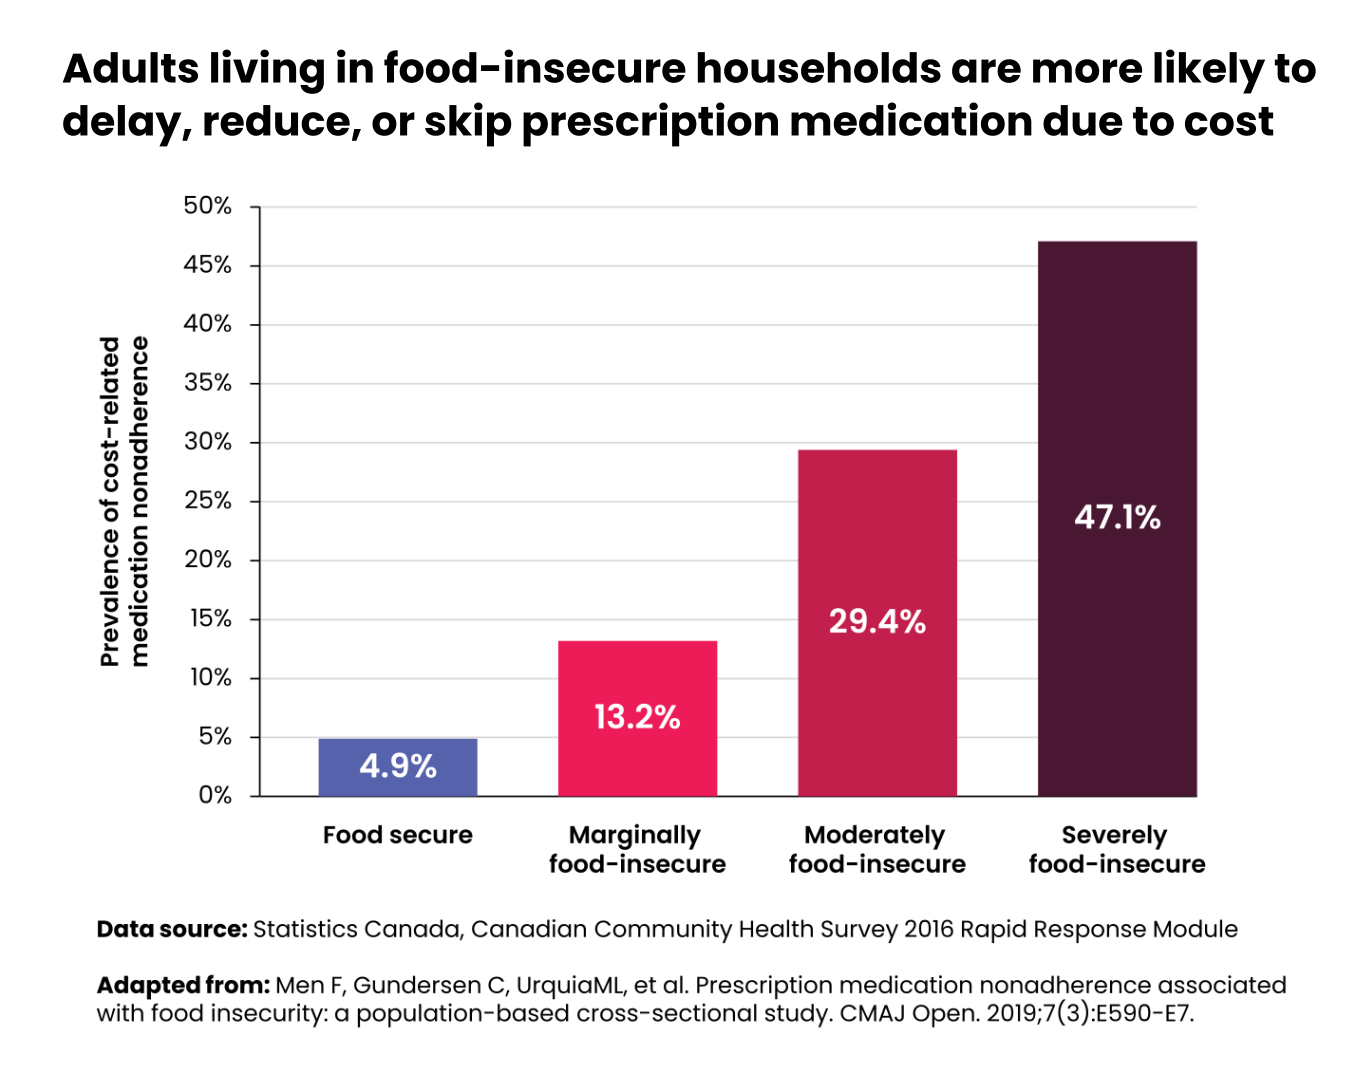 Adults living in food-insecure households are more likely to delay, reduce, or skip prescription medication due to cost.